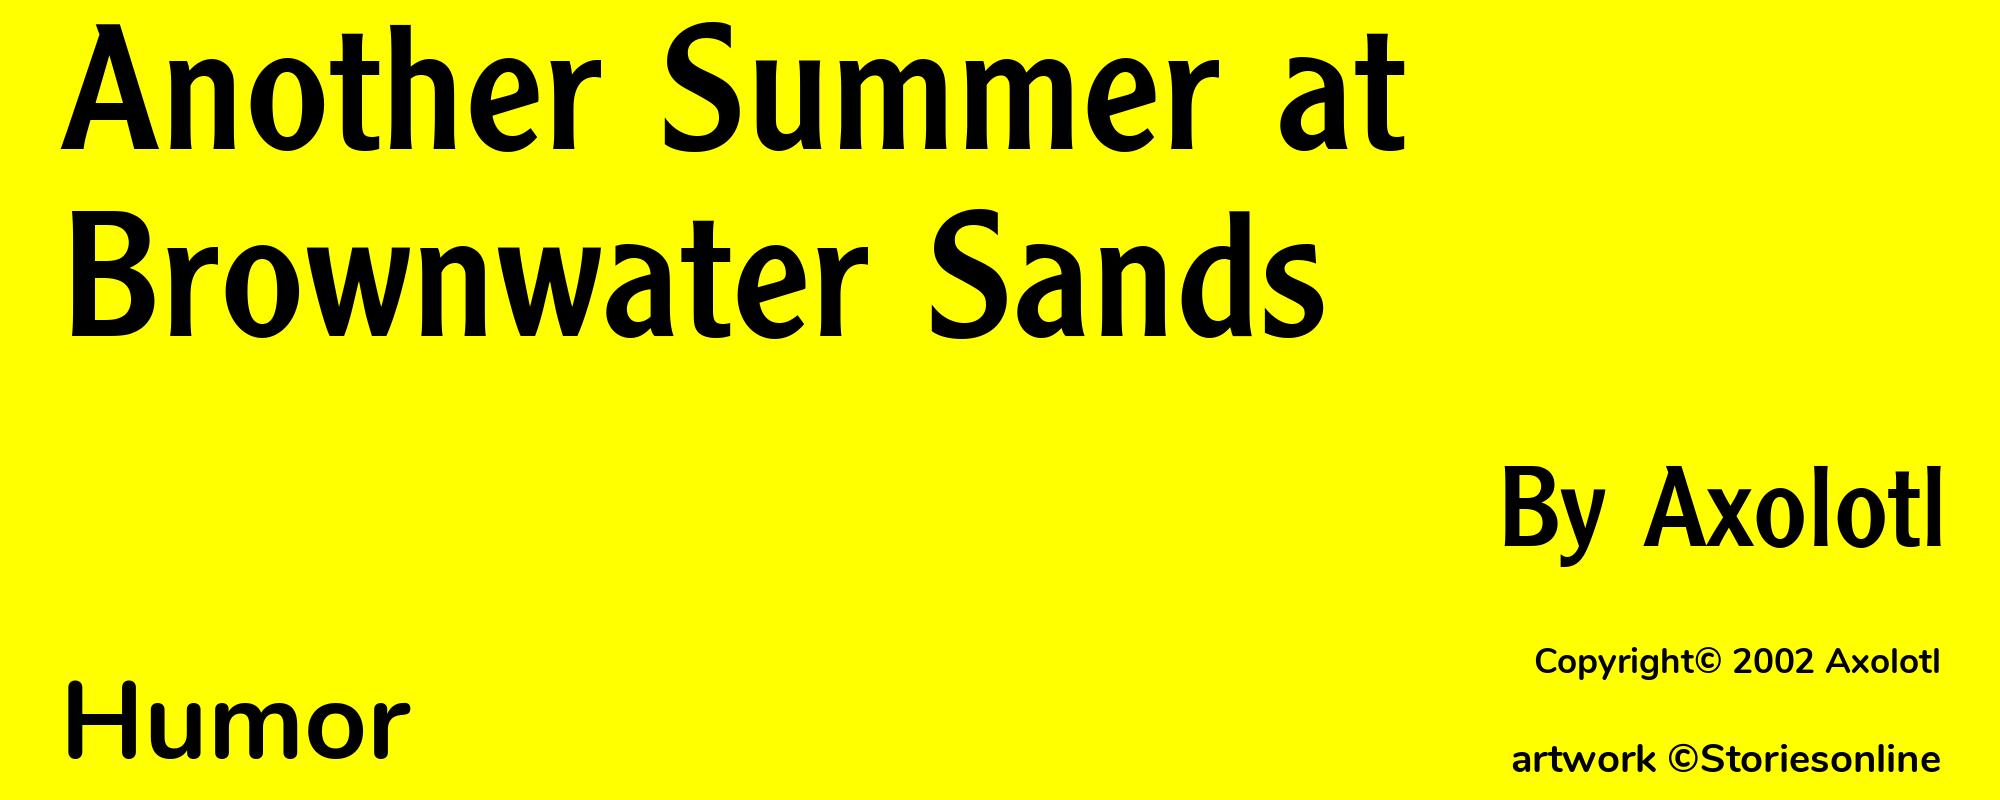 Another Summer at Brownwater Sands - Cover